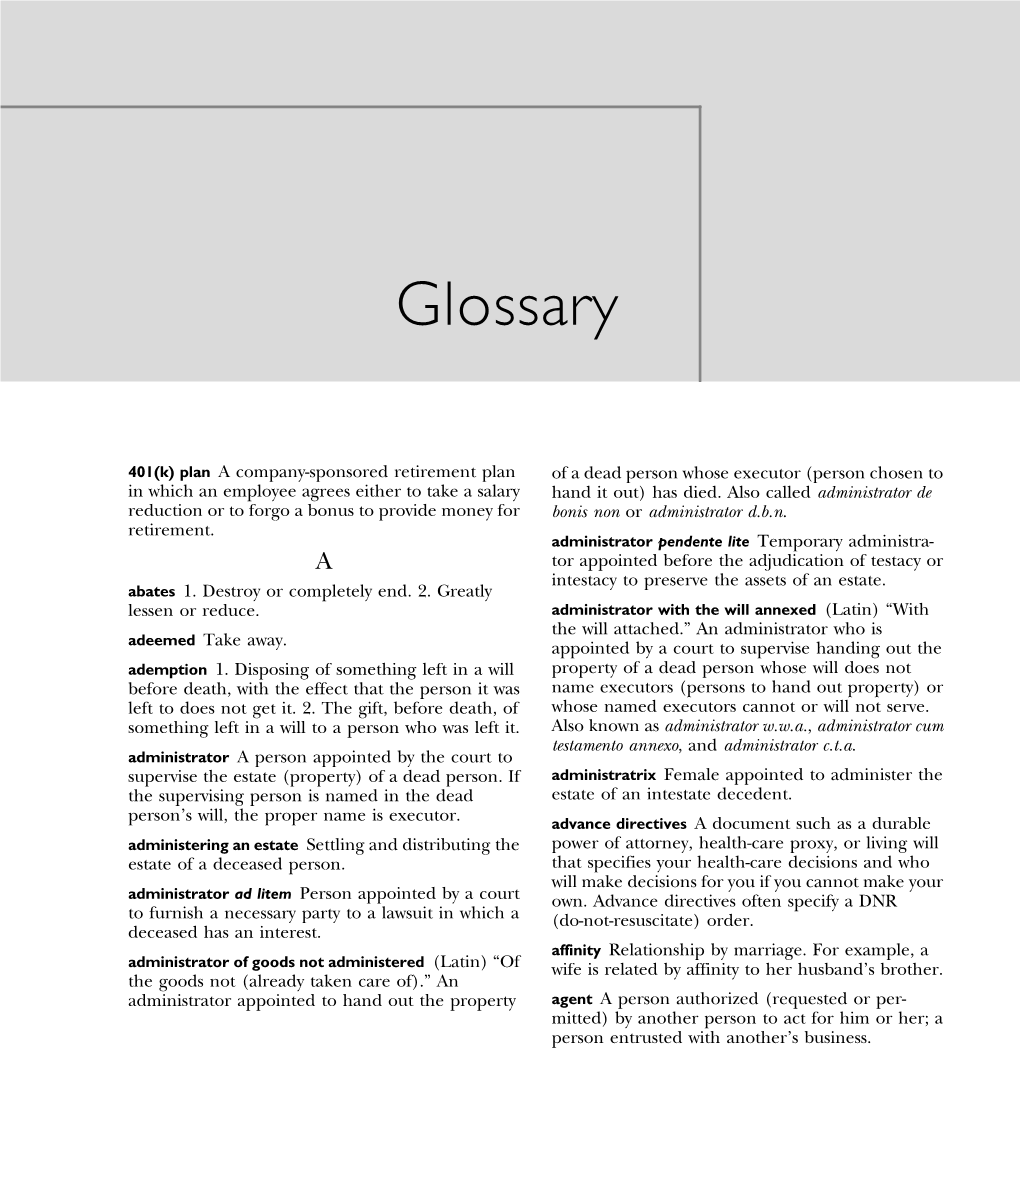 Glossary.3D 5/6/2008 13:55 Page 581